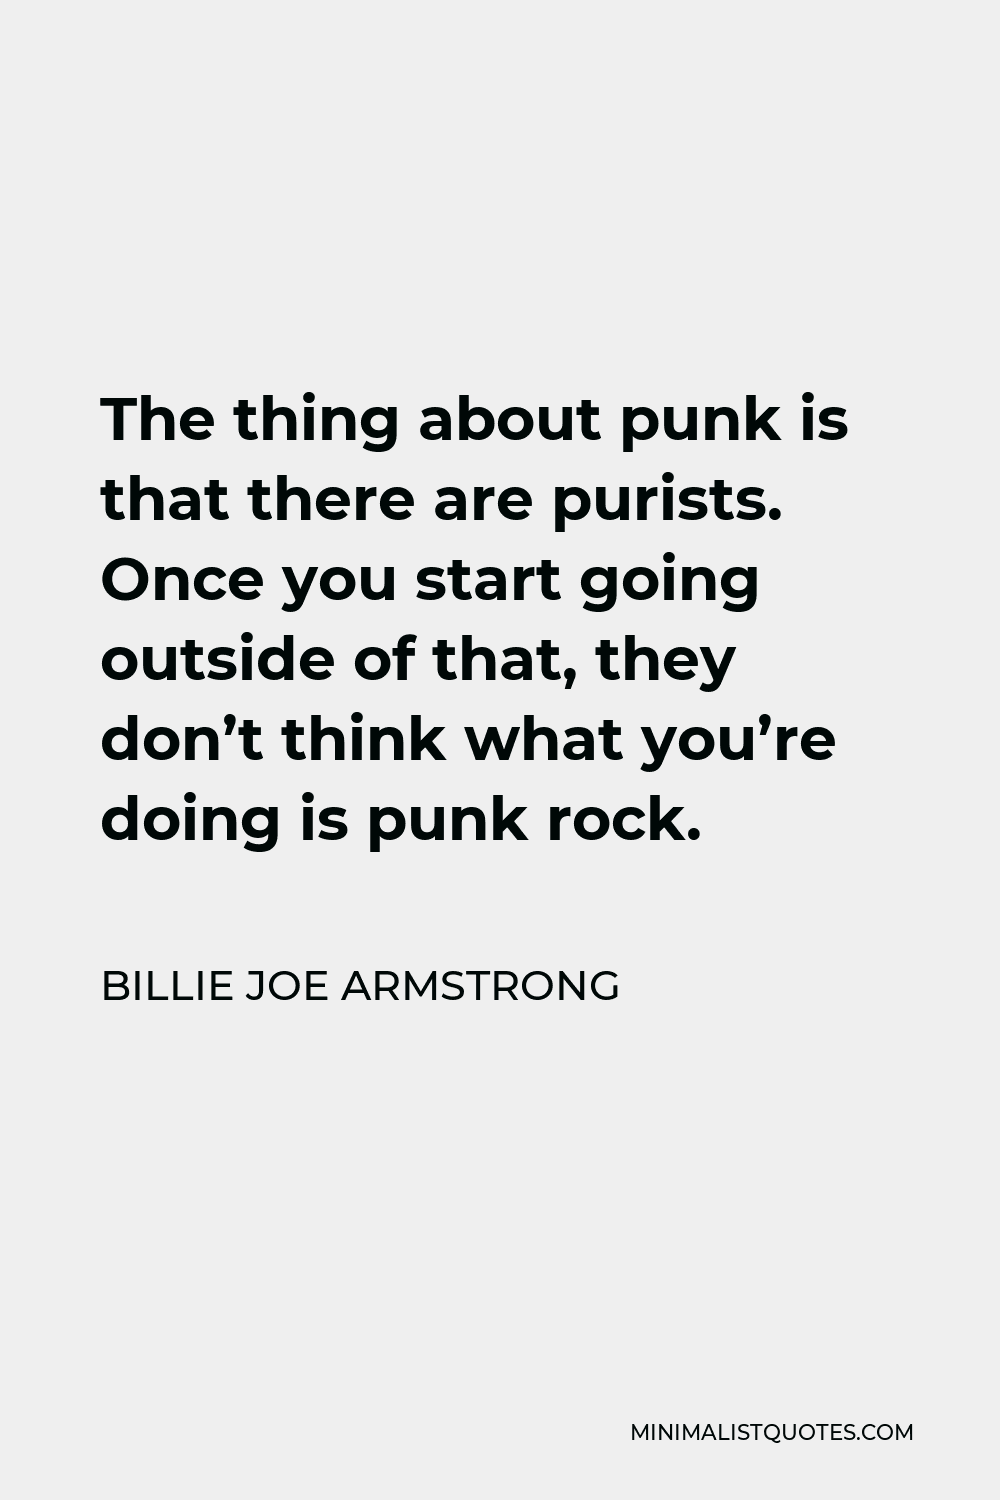 Billie Joe Armstrong Quote - The thing about punk is that there are purists. Once you start going outside of that, they don’t think what you’re doing is punk rock.